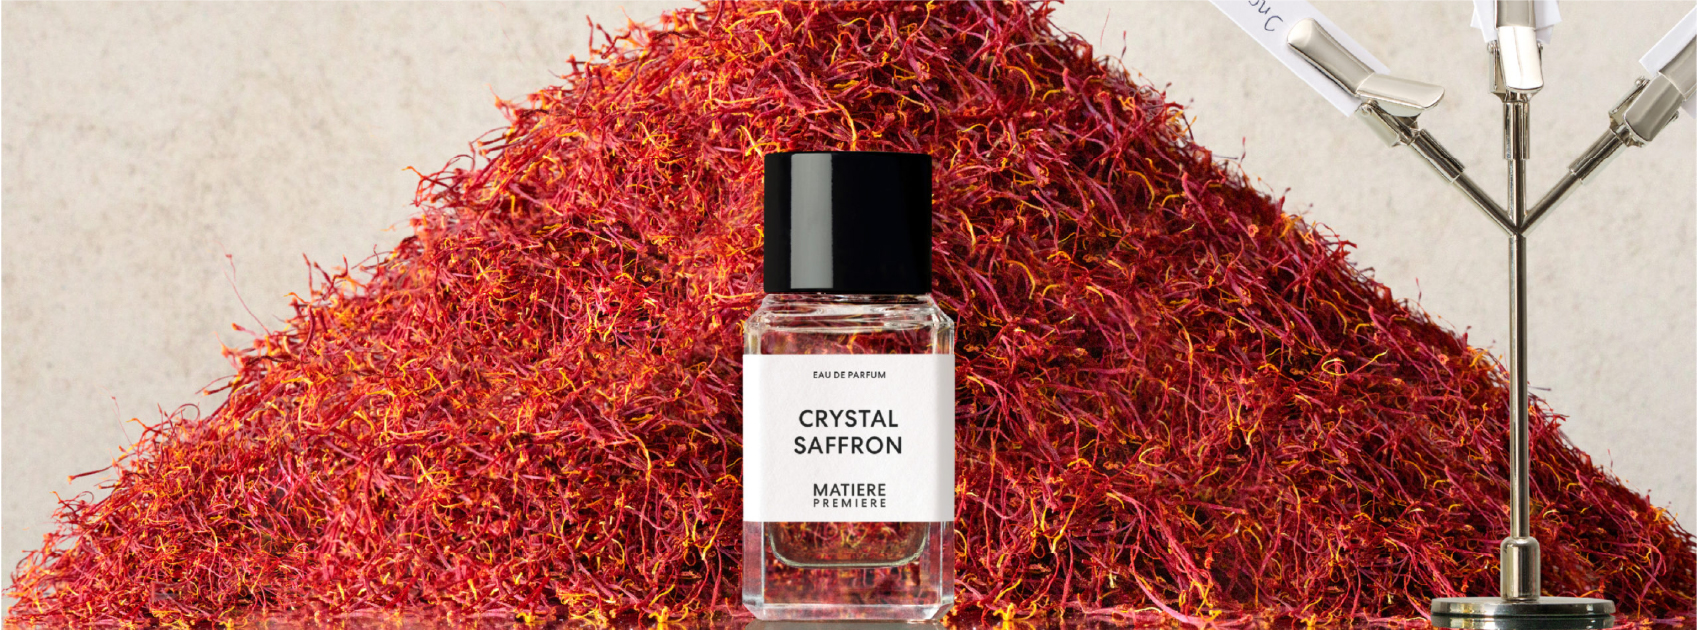 bottle of crystal saffron by matiere premiere in front of a pile of saffron